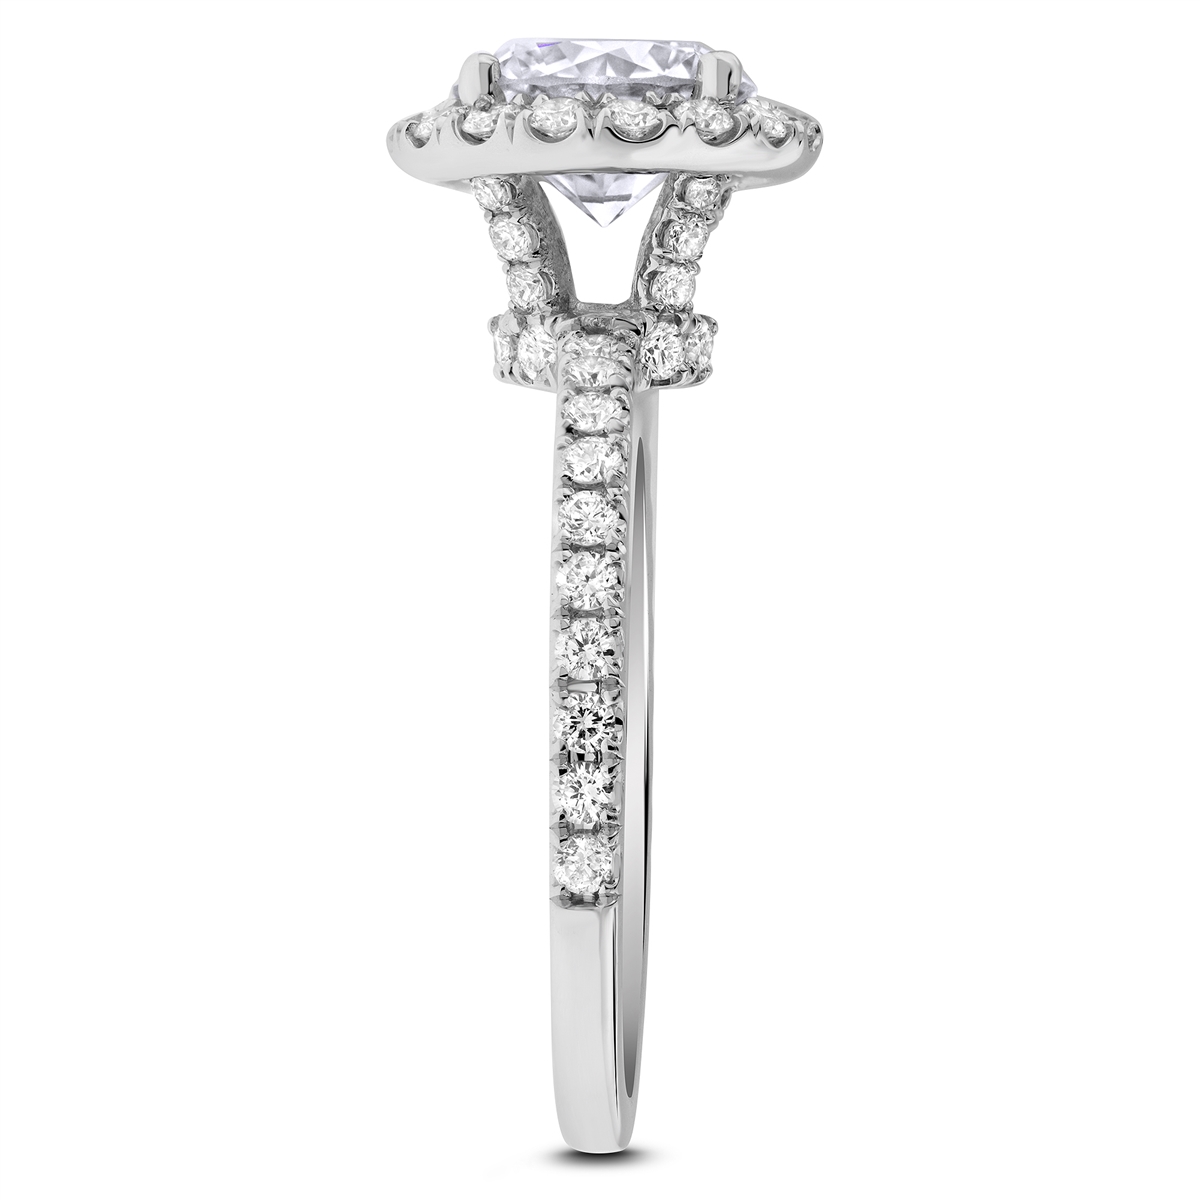 Halo Round Diamond Engagement Ring in 18k White Gold 1.78 ct. tw.